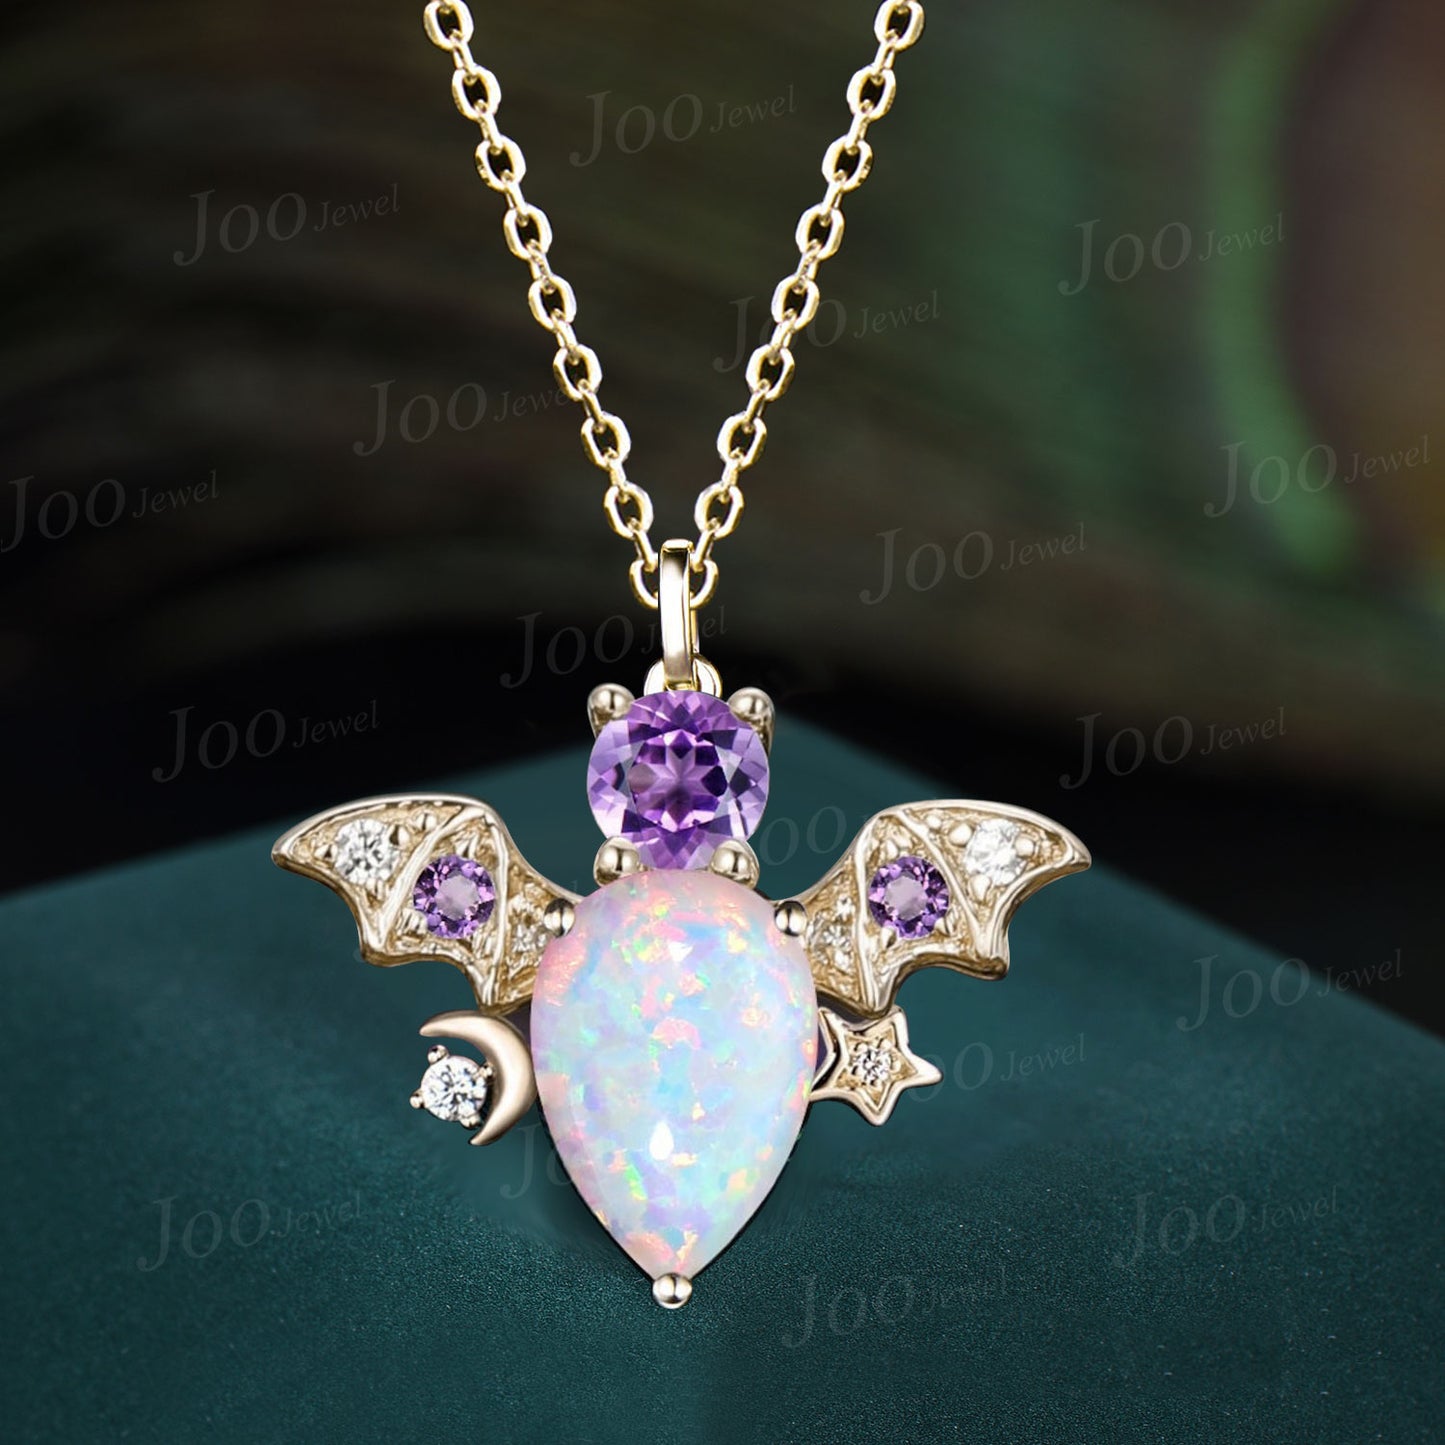 Teardrop White Fire Opal Amethyst Necklace Vintage Sterling Silver Moon Star Opal Bat Pendant Unique October Birthstone Gifts For Daughter